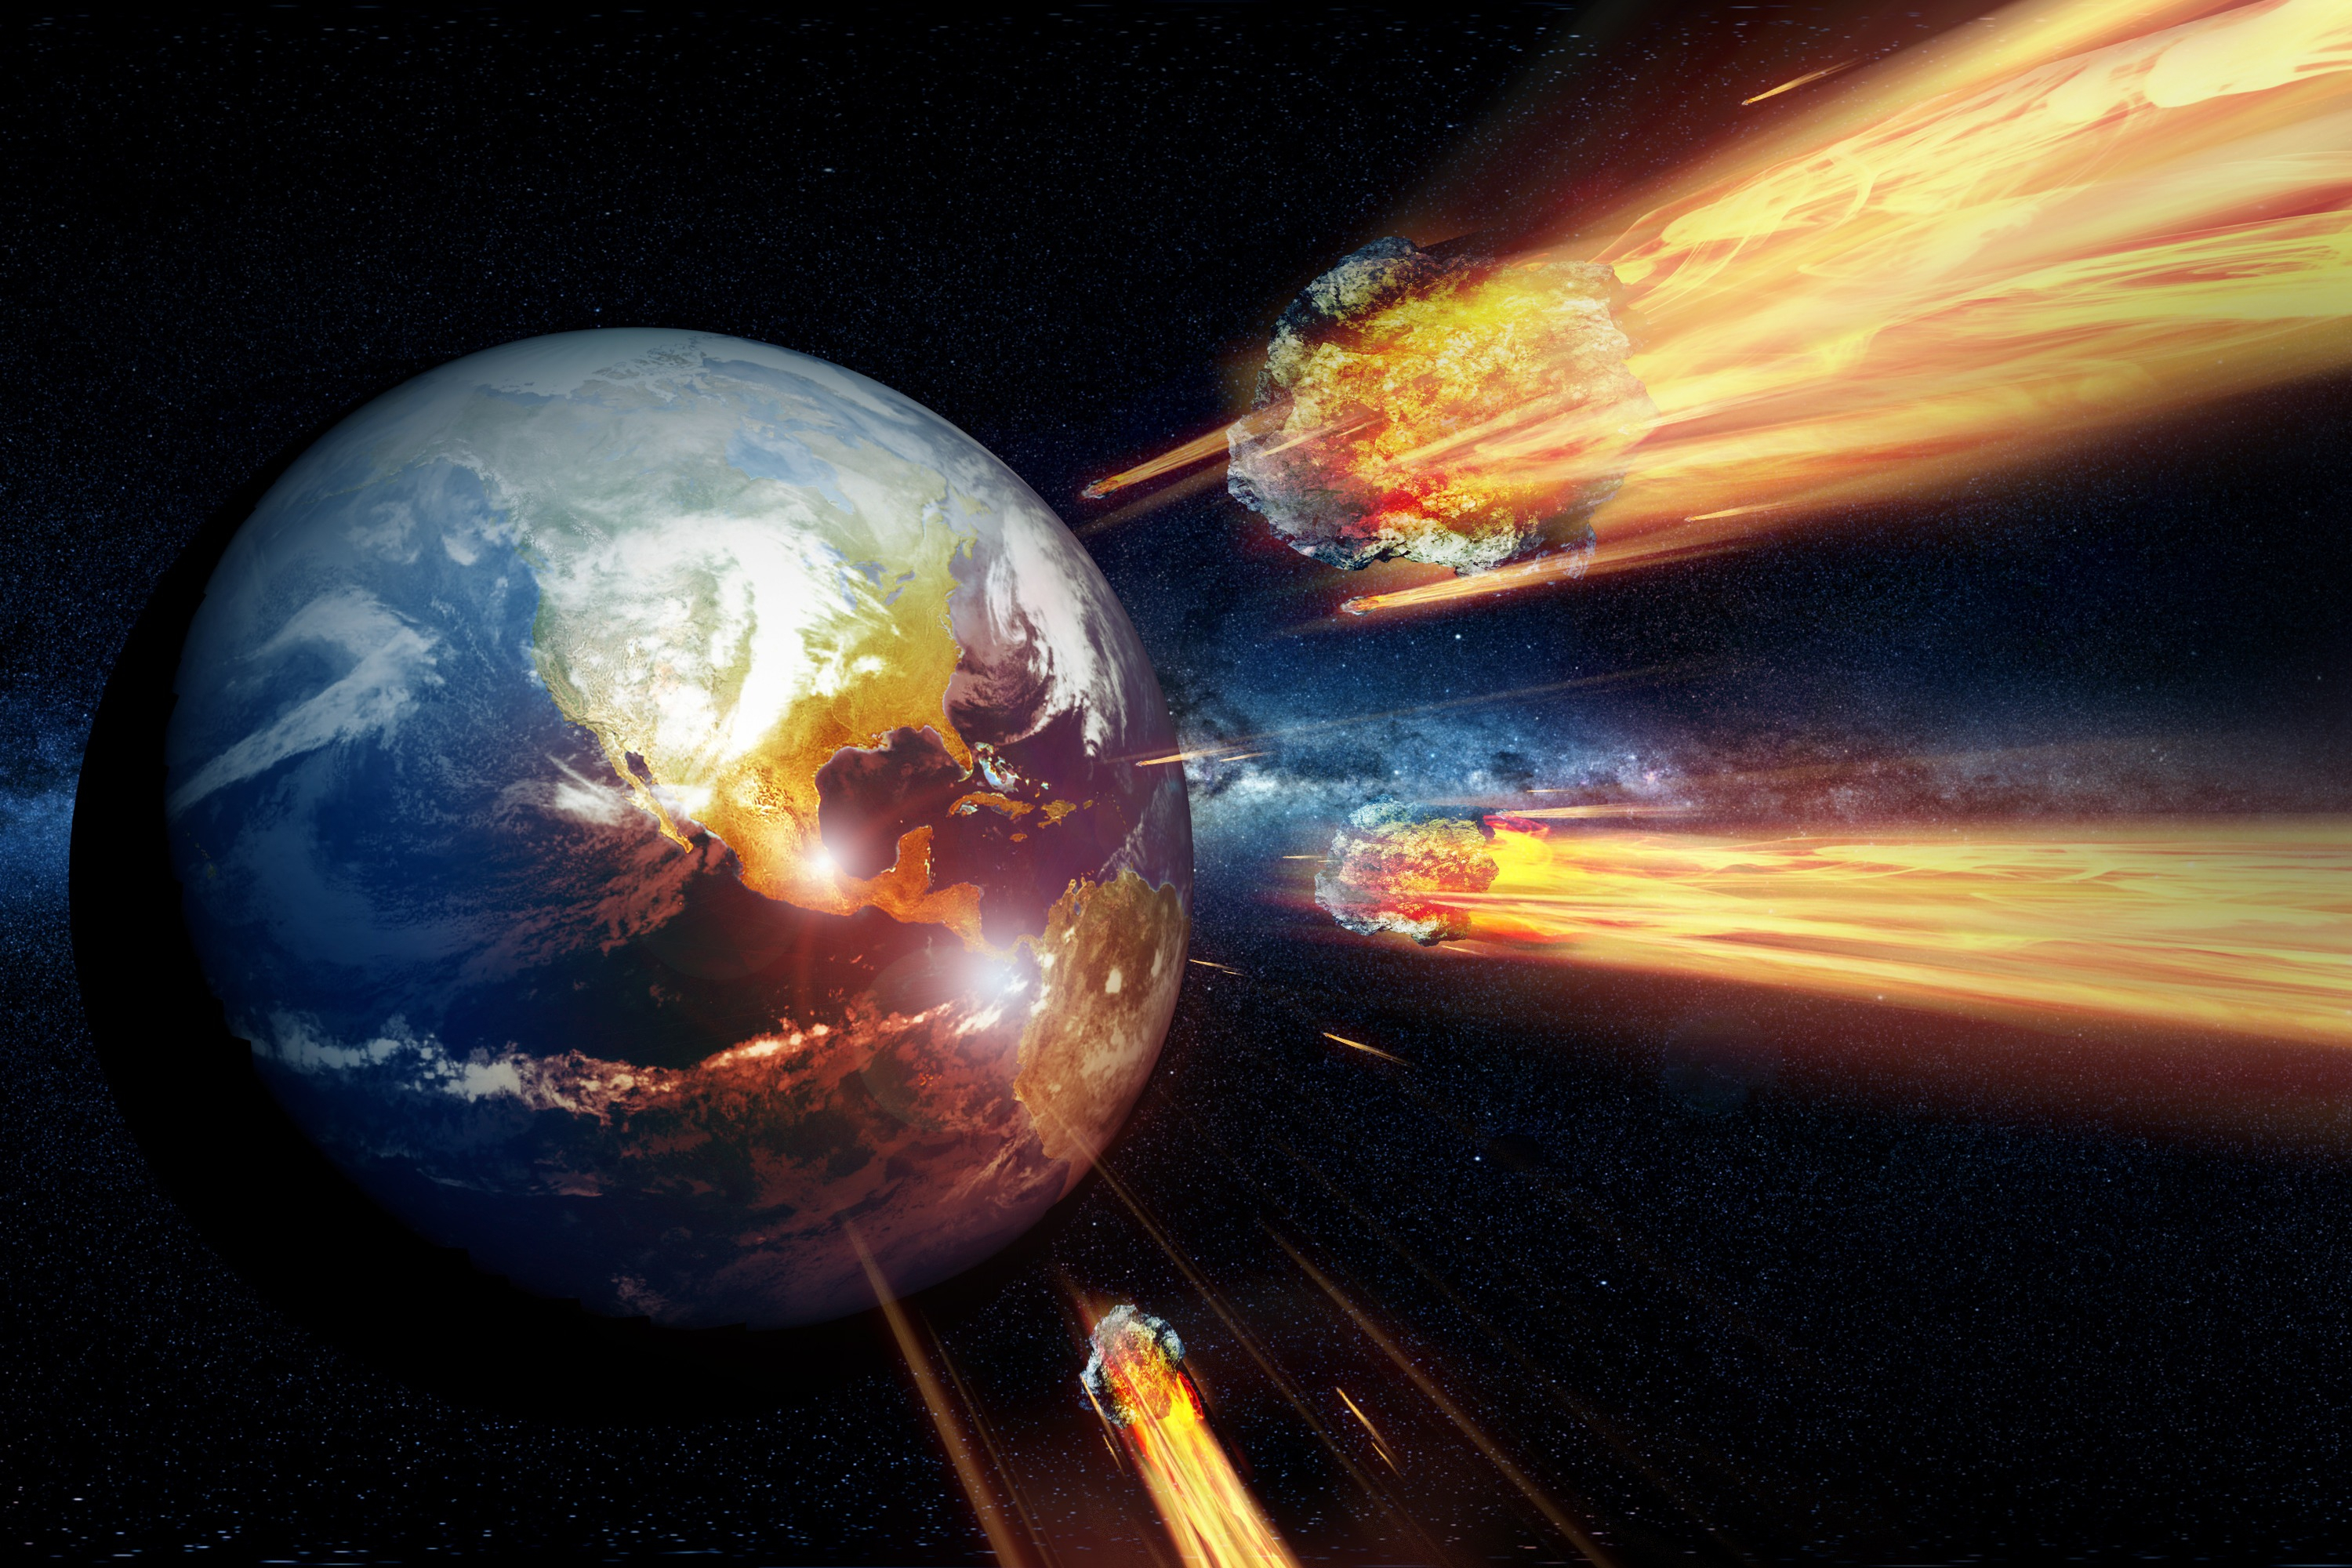 Armageddon - End of the World. Asteroids Heading and Hitting the Earth. End of the World Theme.